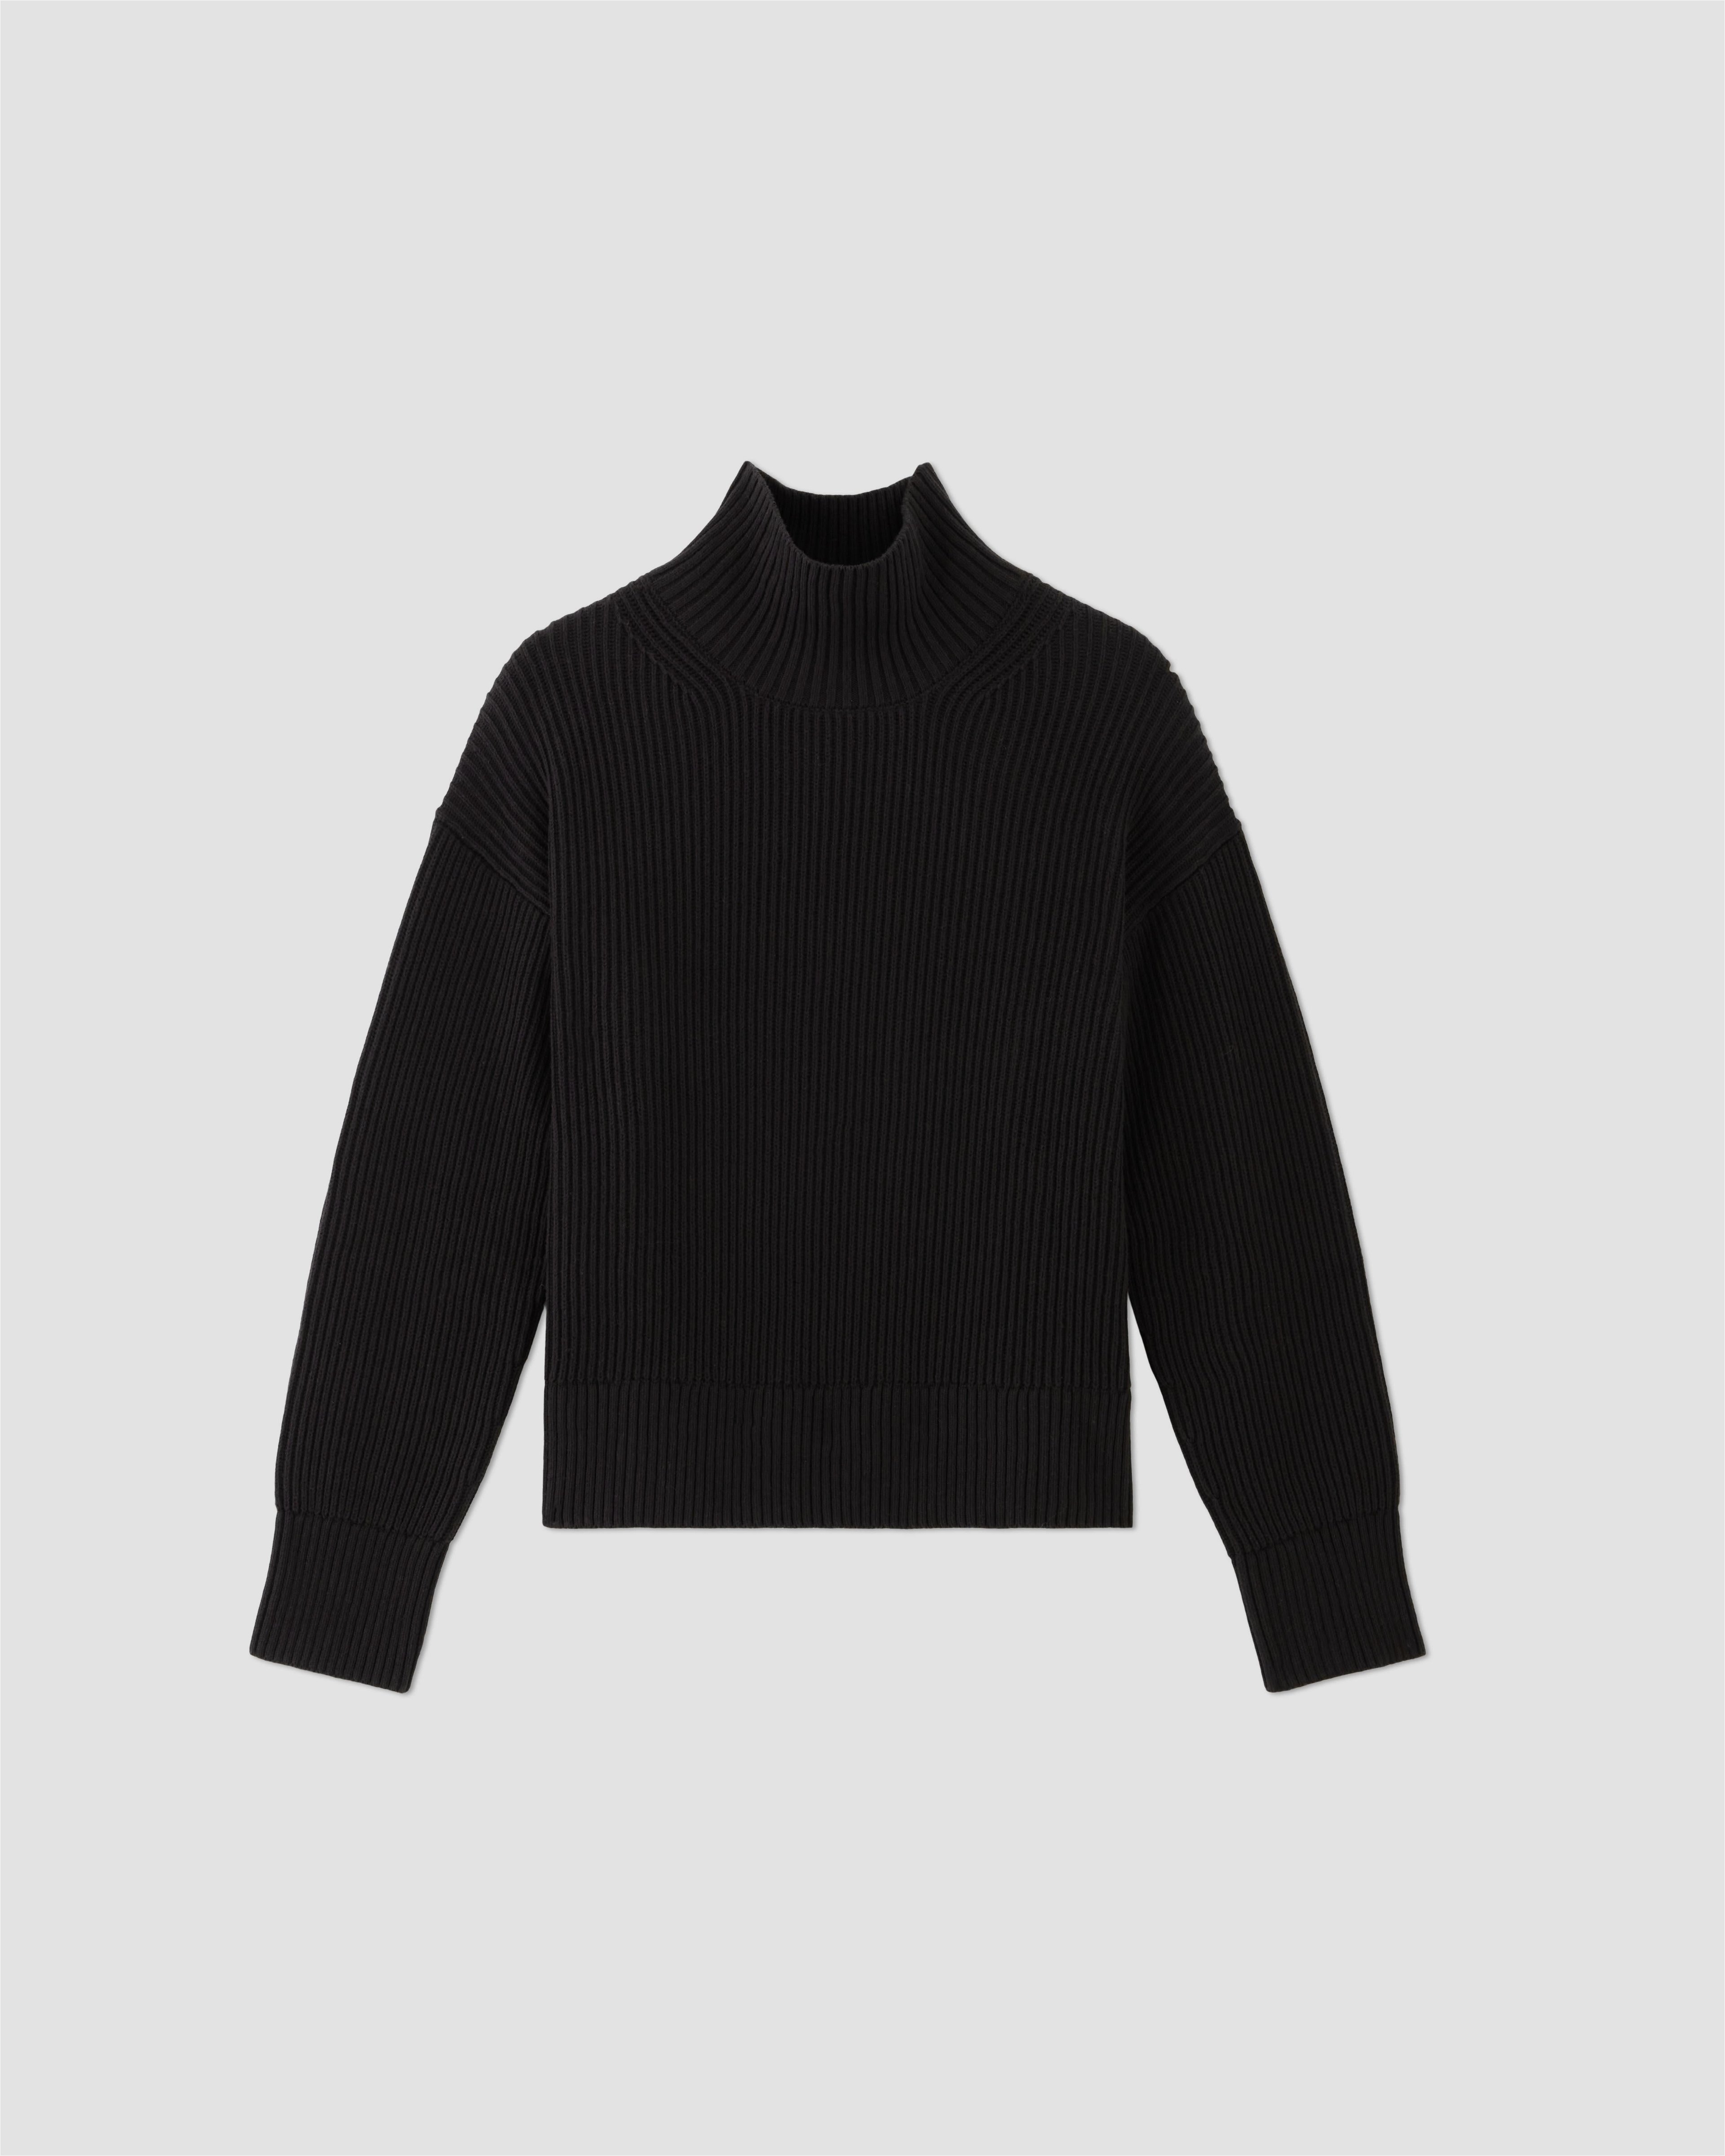 The Organic Cotton Ribbed Turtleneck by EVERLANE